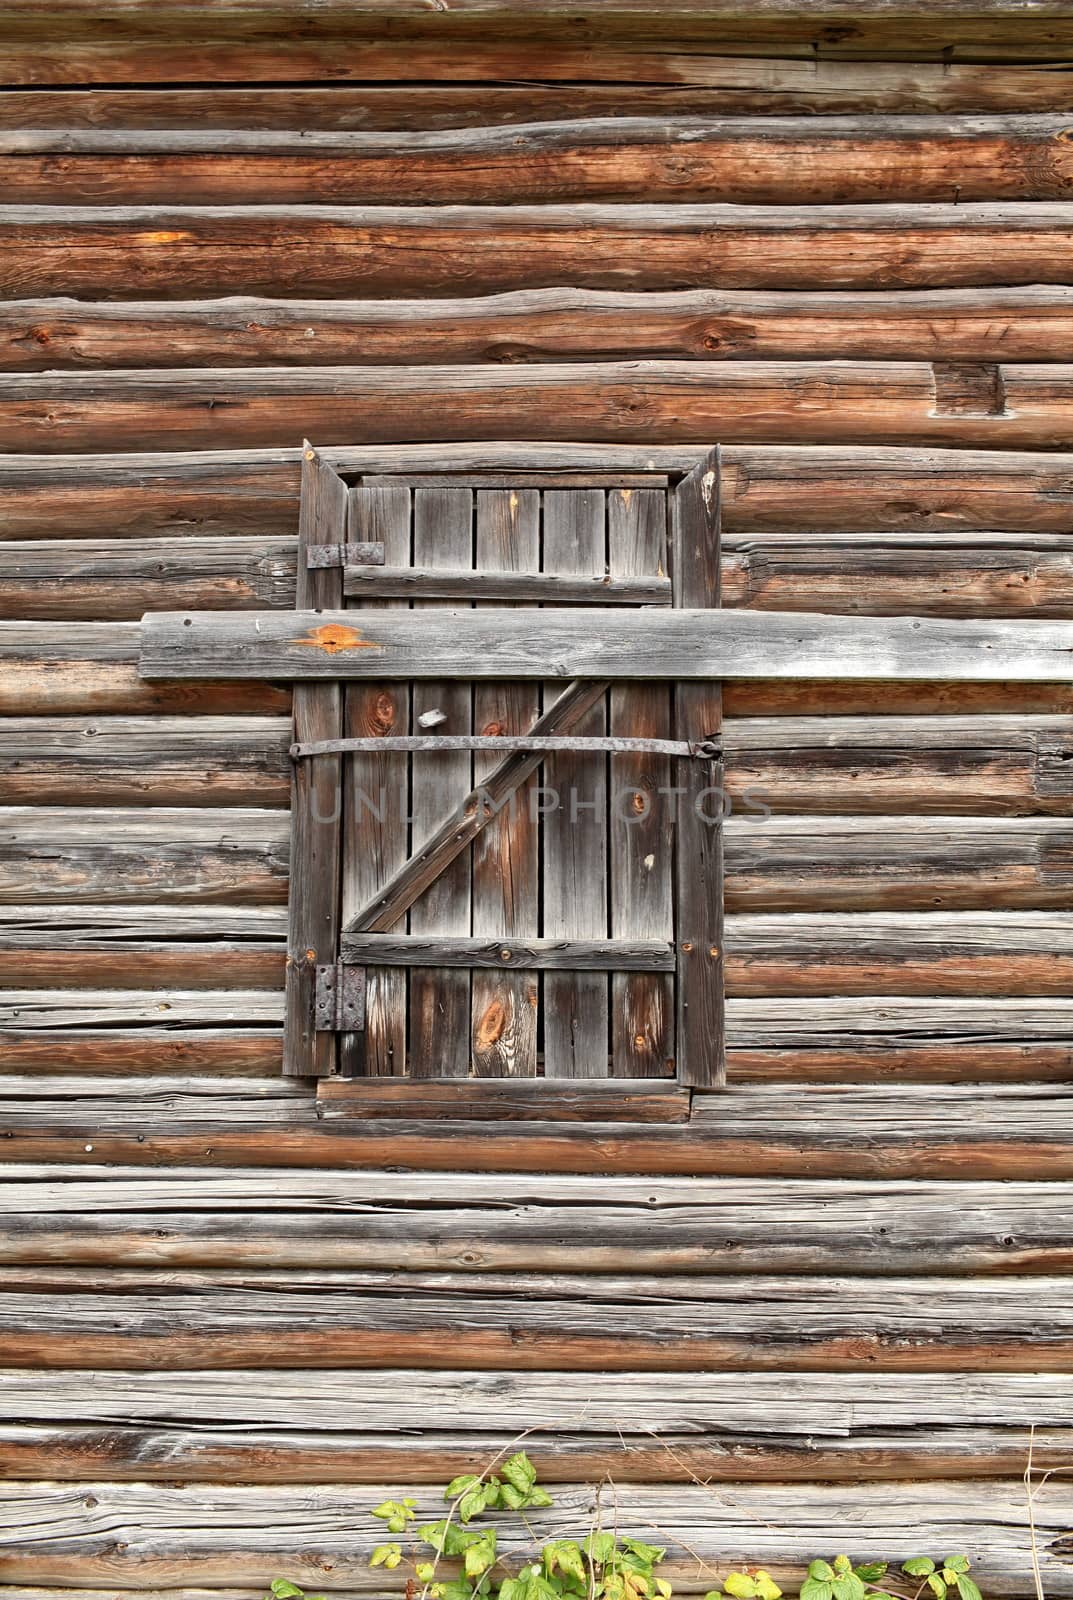 Boarded  up door of an old barn